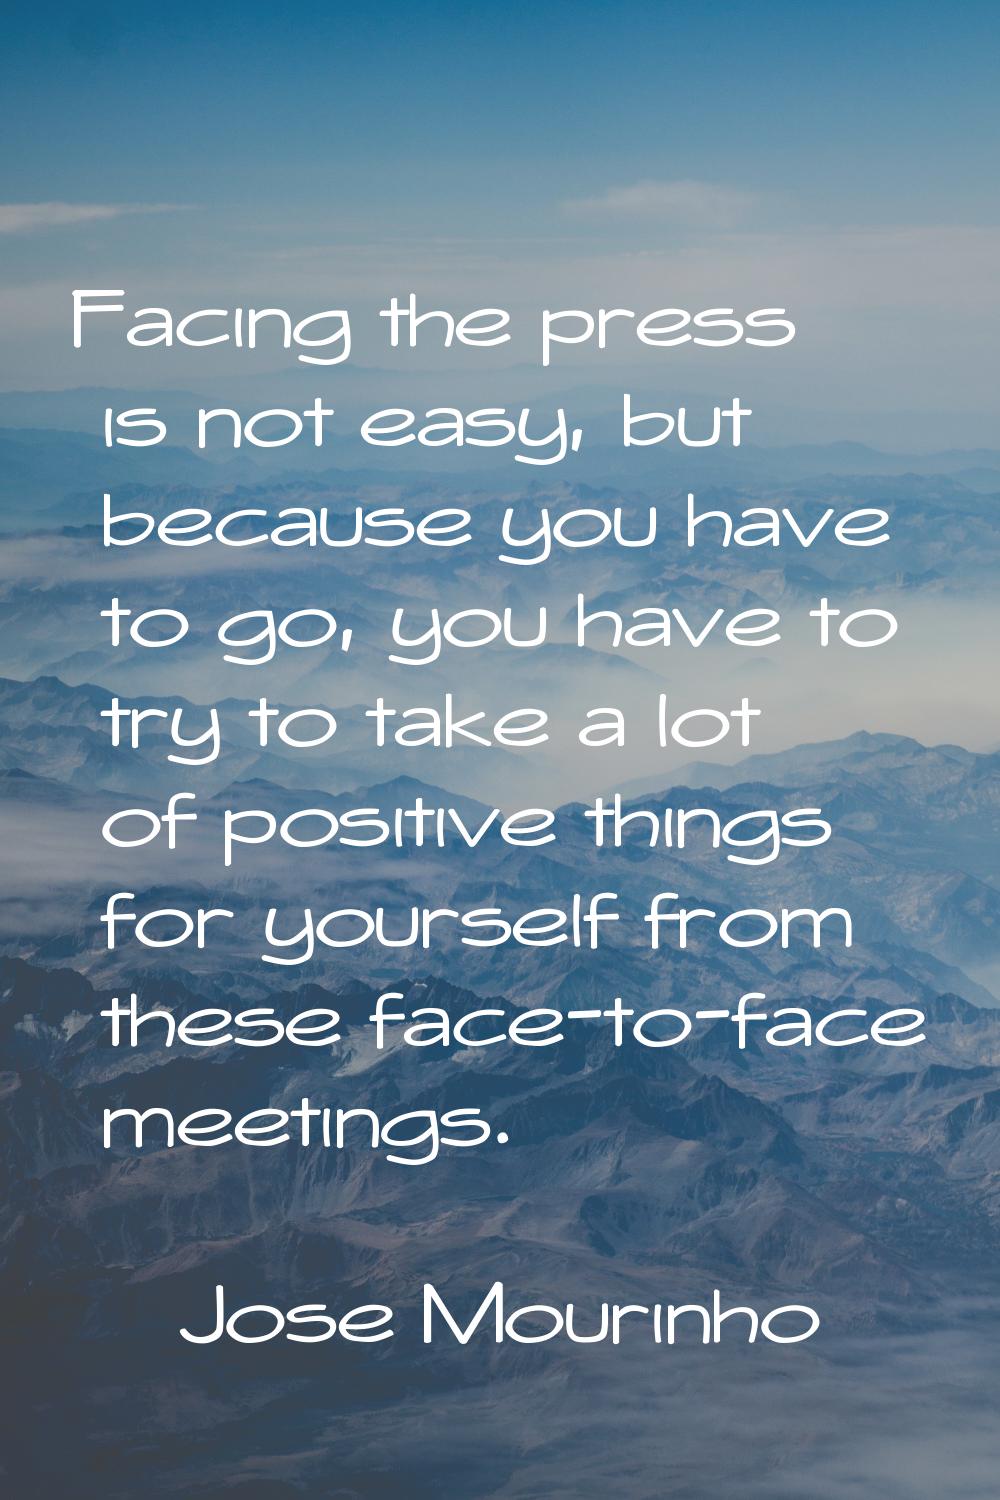 Facing the press is not easy, but because you have to go, you have to try to take a lot of positive